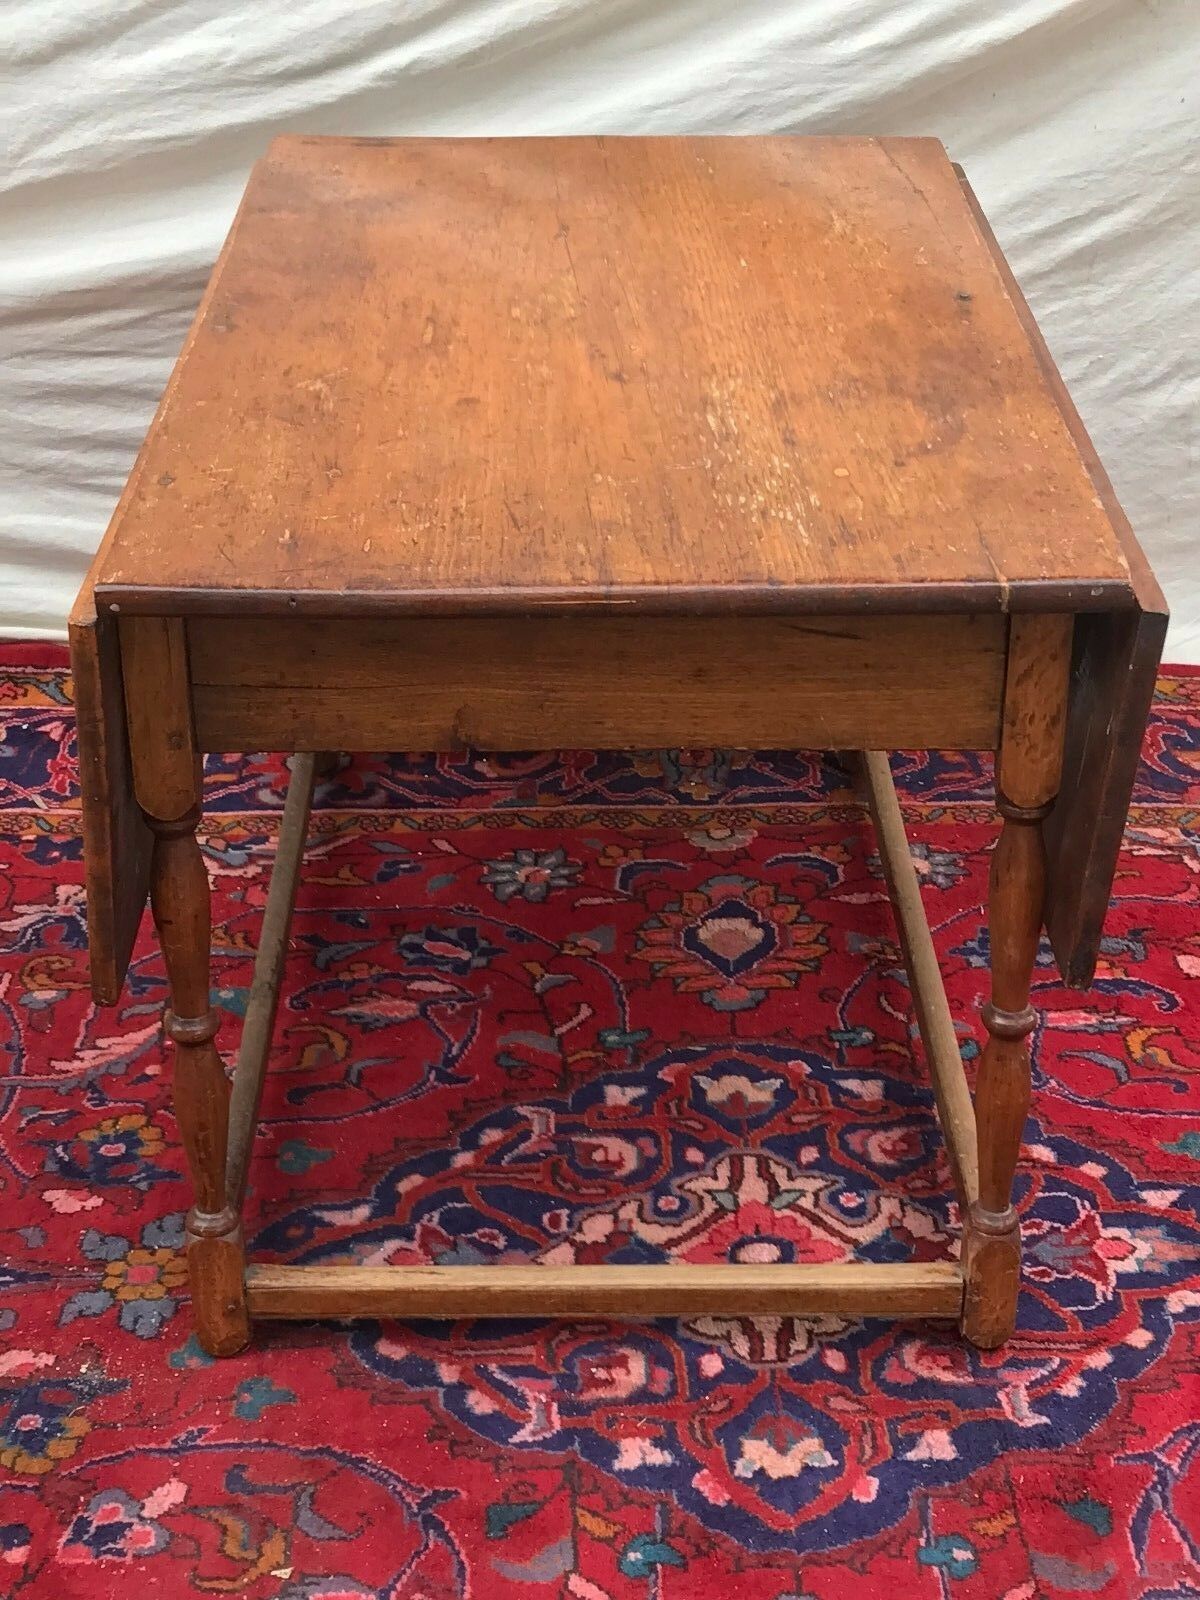 18TH C WILLIAM & MARY PERIOD NEW ENGLAND ANTIQUE DROP LEAF TAVERN / DINING TABLE